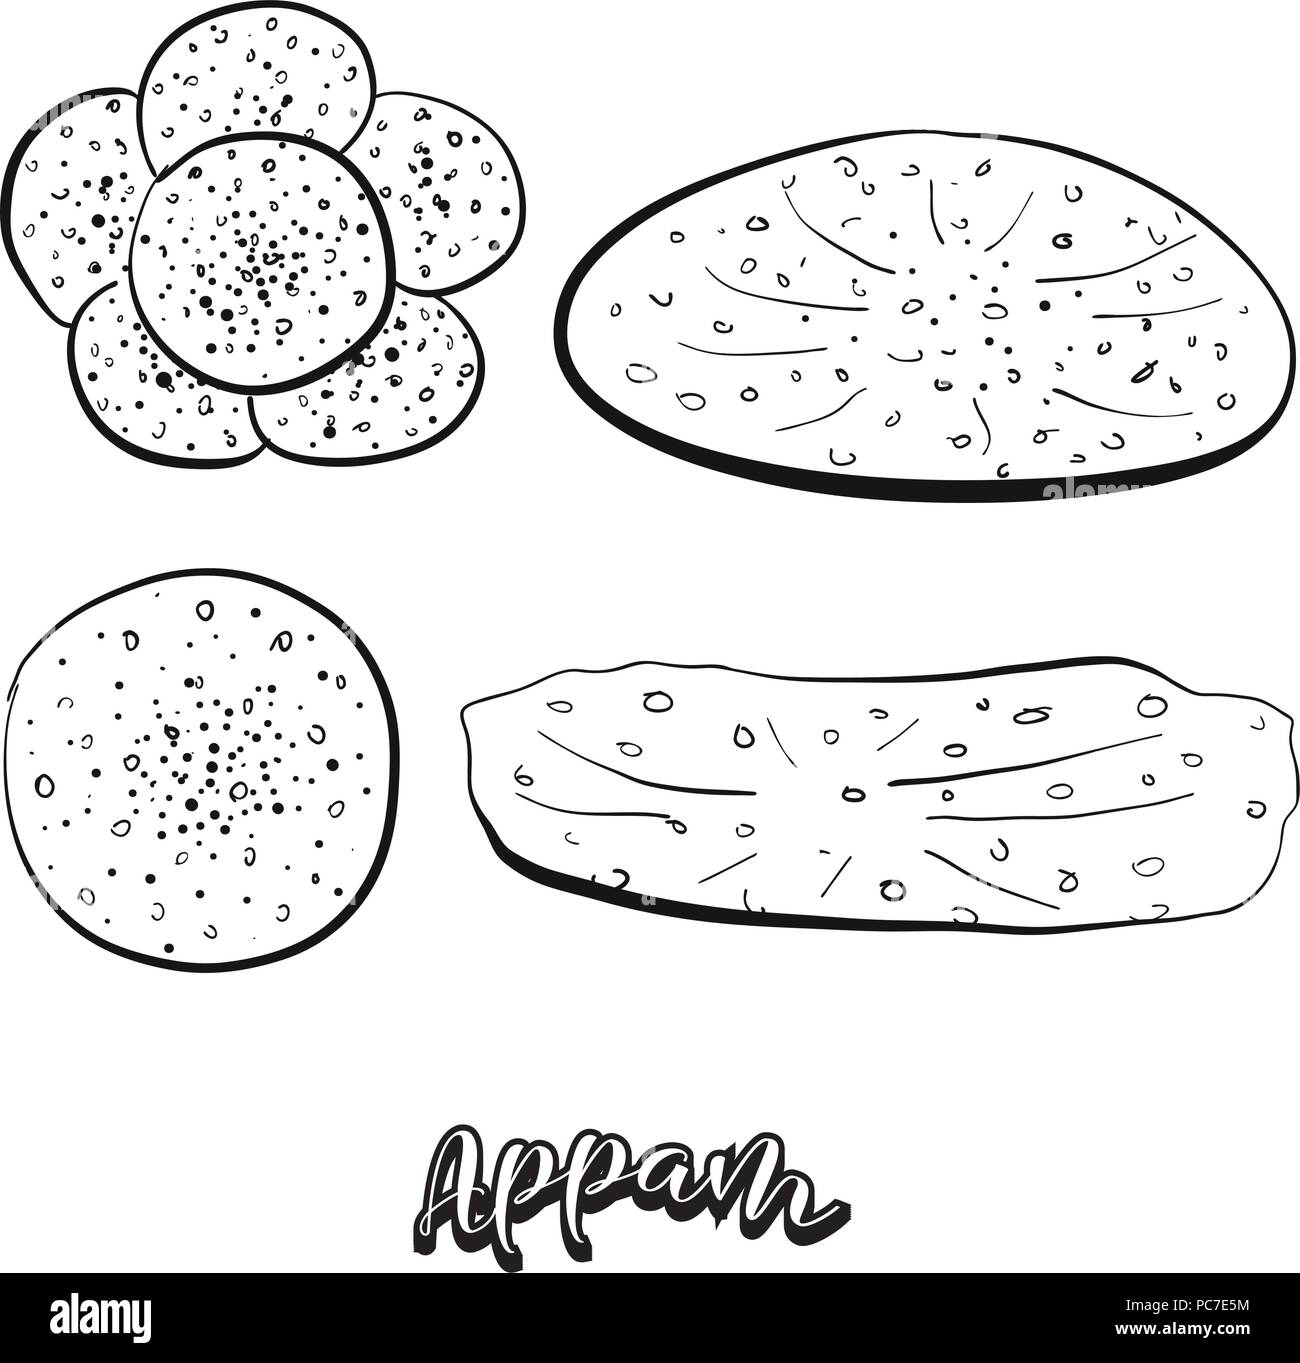 Hand drawn sketch of Appam food. Vector drawing of Varies widely food, usually known in India, Kerala, Sri Lanka. Bread illustration series. Stock Vector